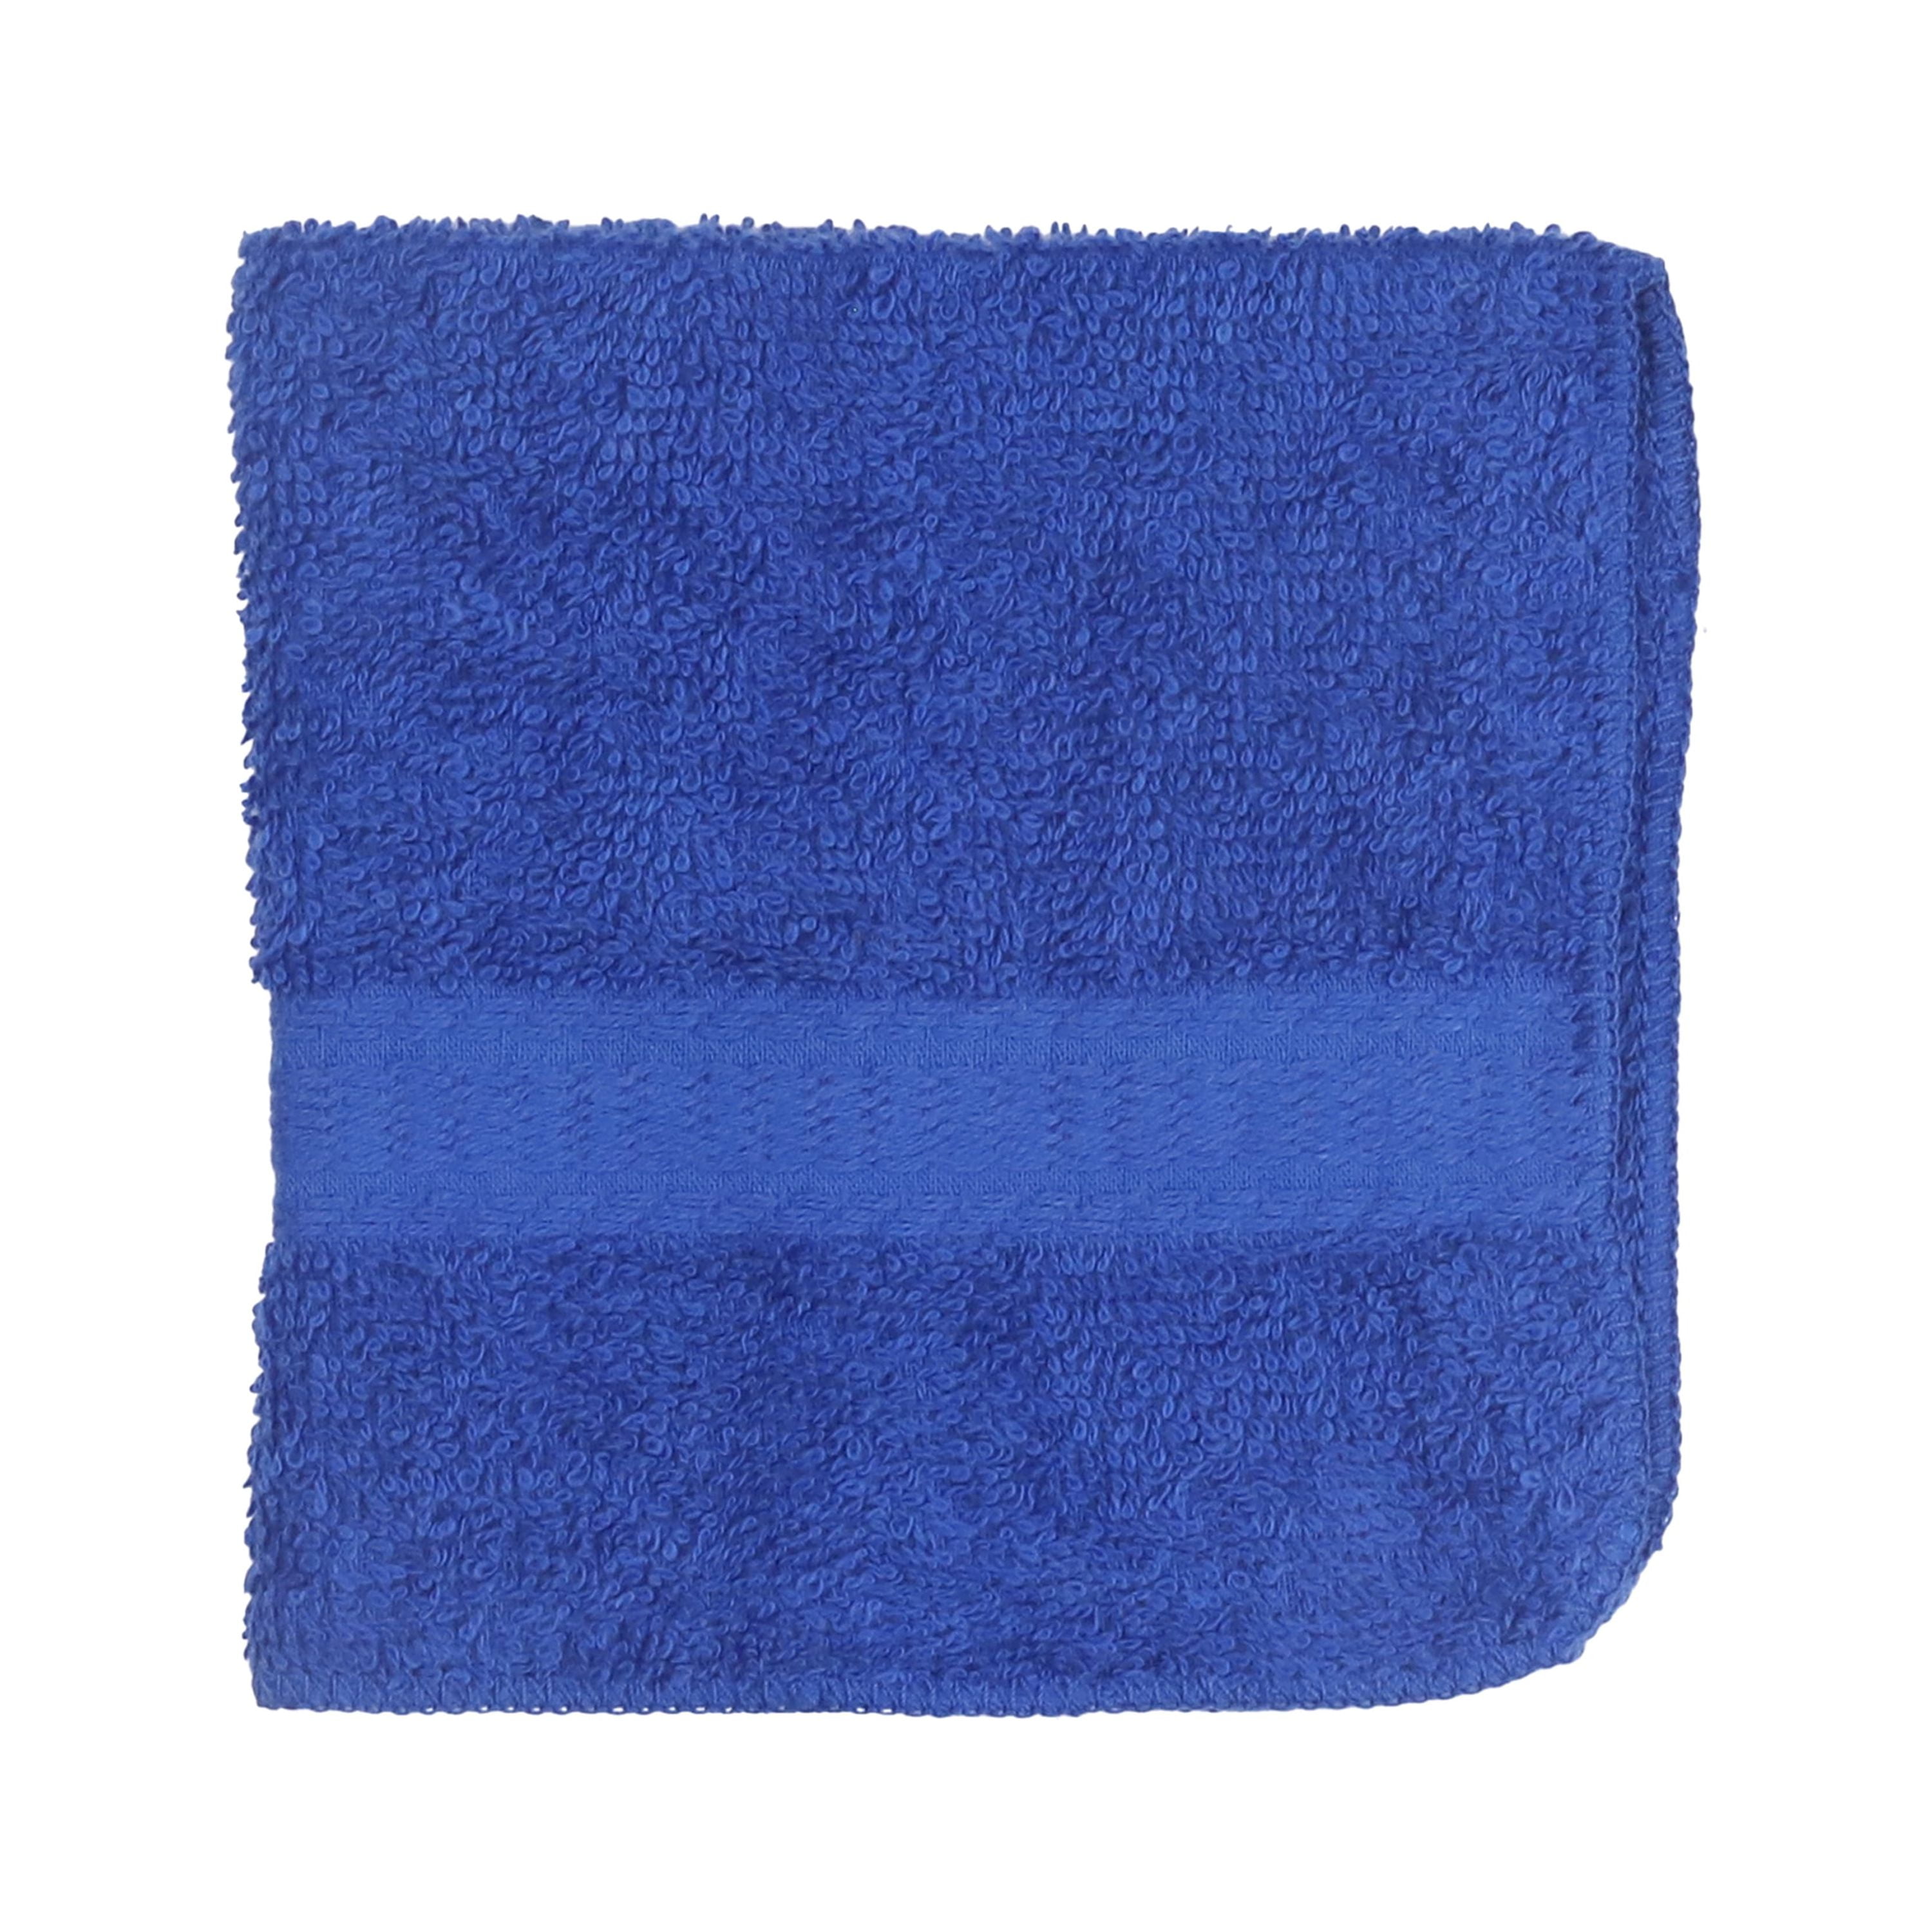 Mainstays Solid Hand Towel, Royal Spice 